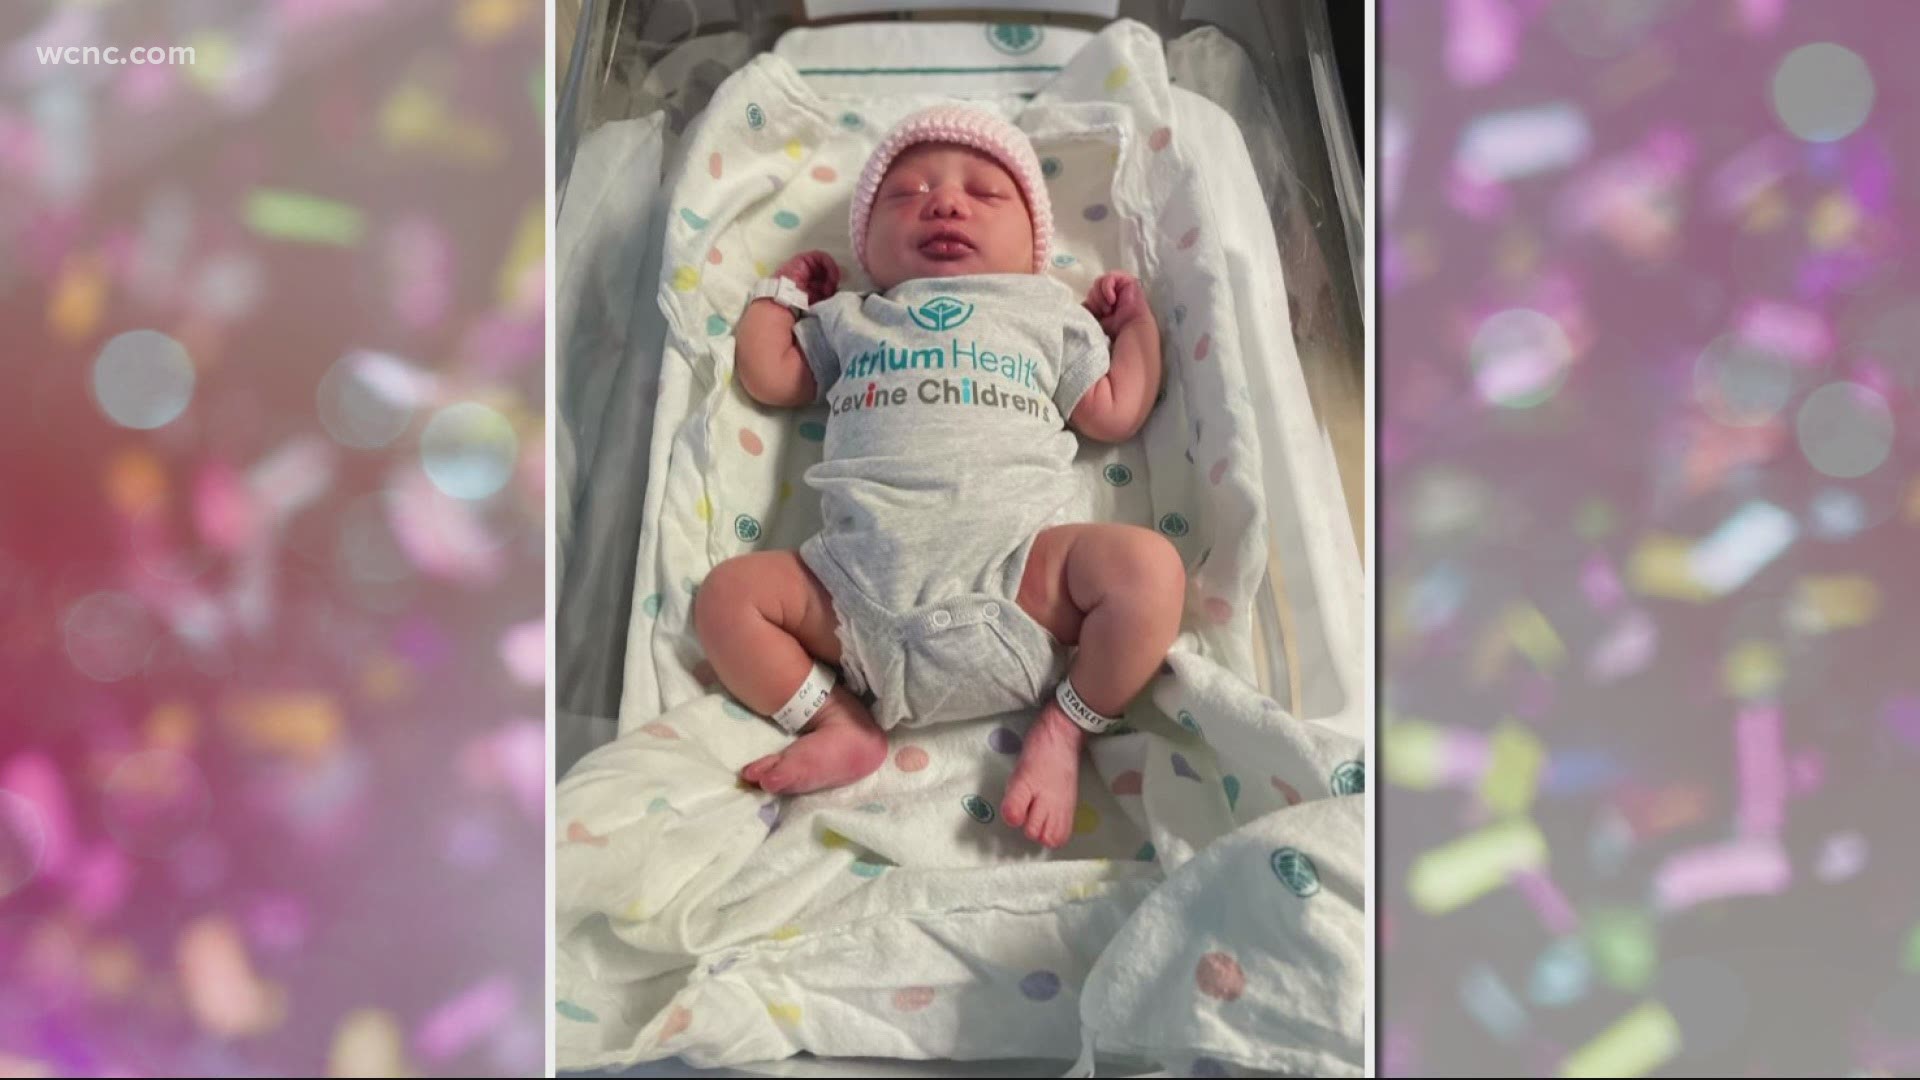 Charlotte-area hospitals are welcoming some new bundles of joy to usher in 2021.